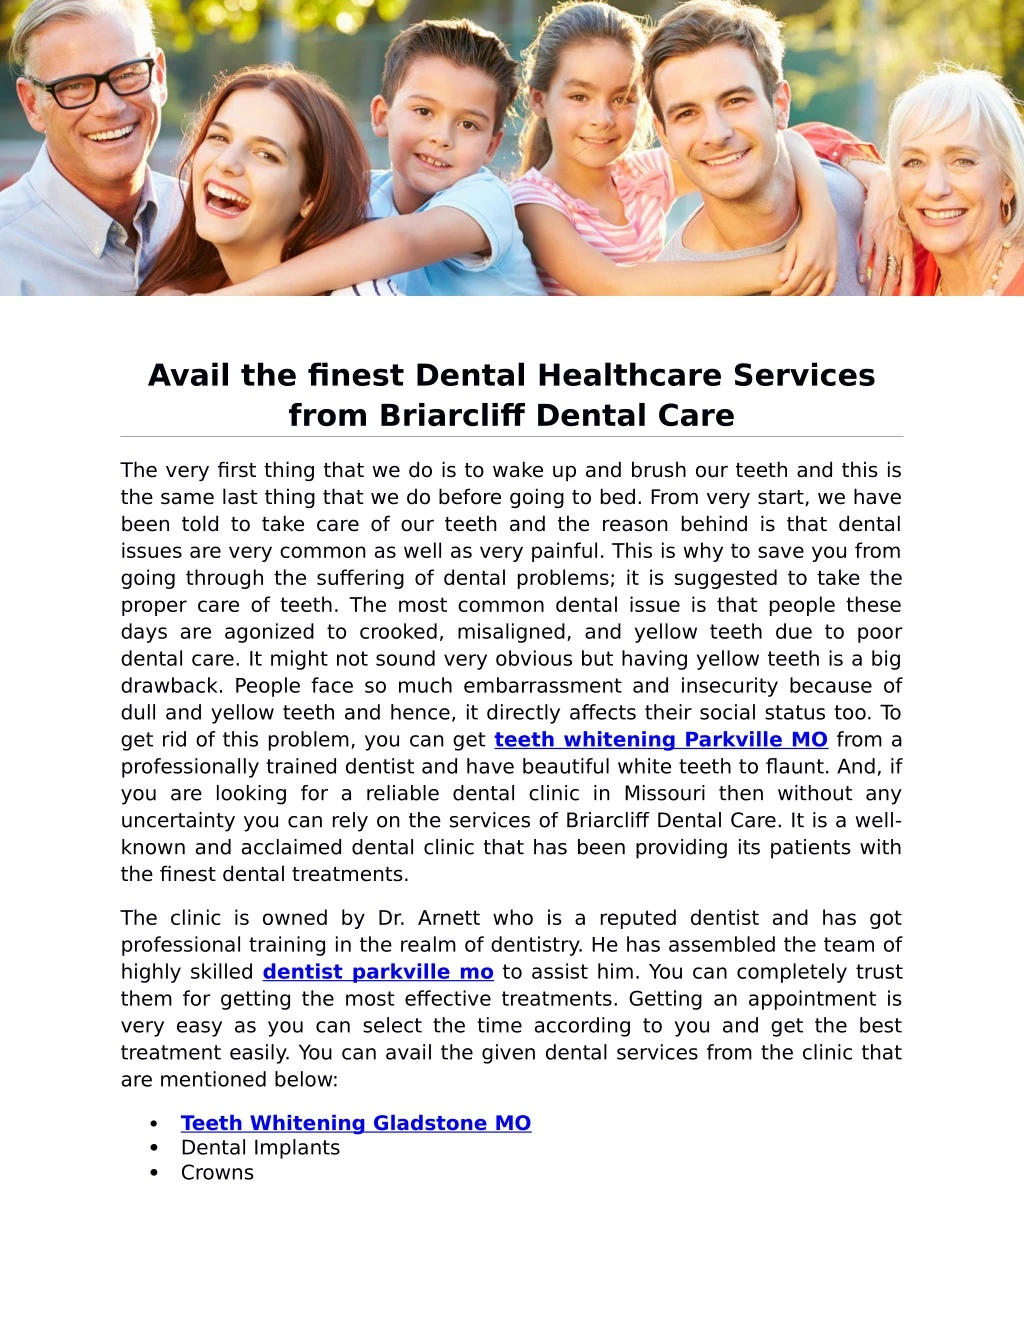 avail the finest dental healthcare services from